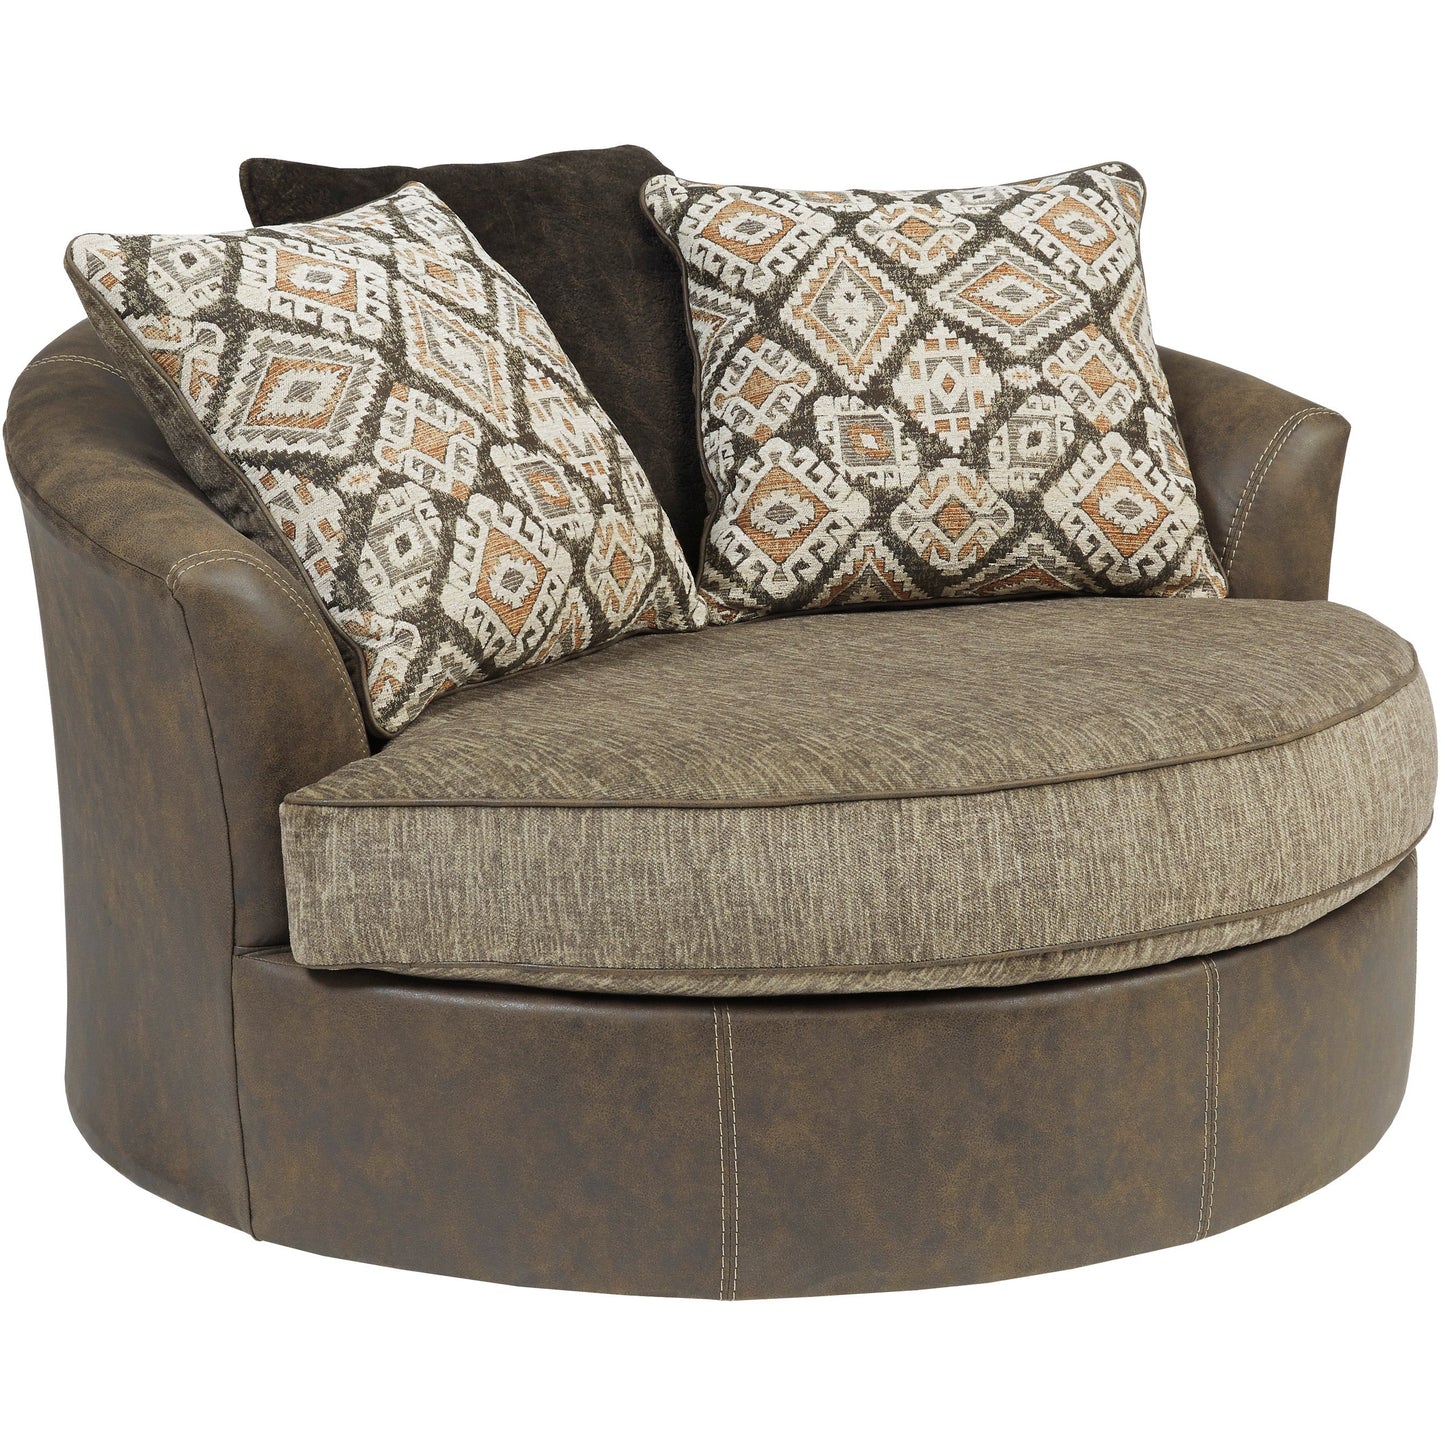 ABALONE ACCENT SWIVEL CHAIR - CHOCOLATE